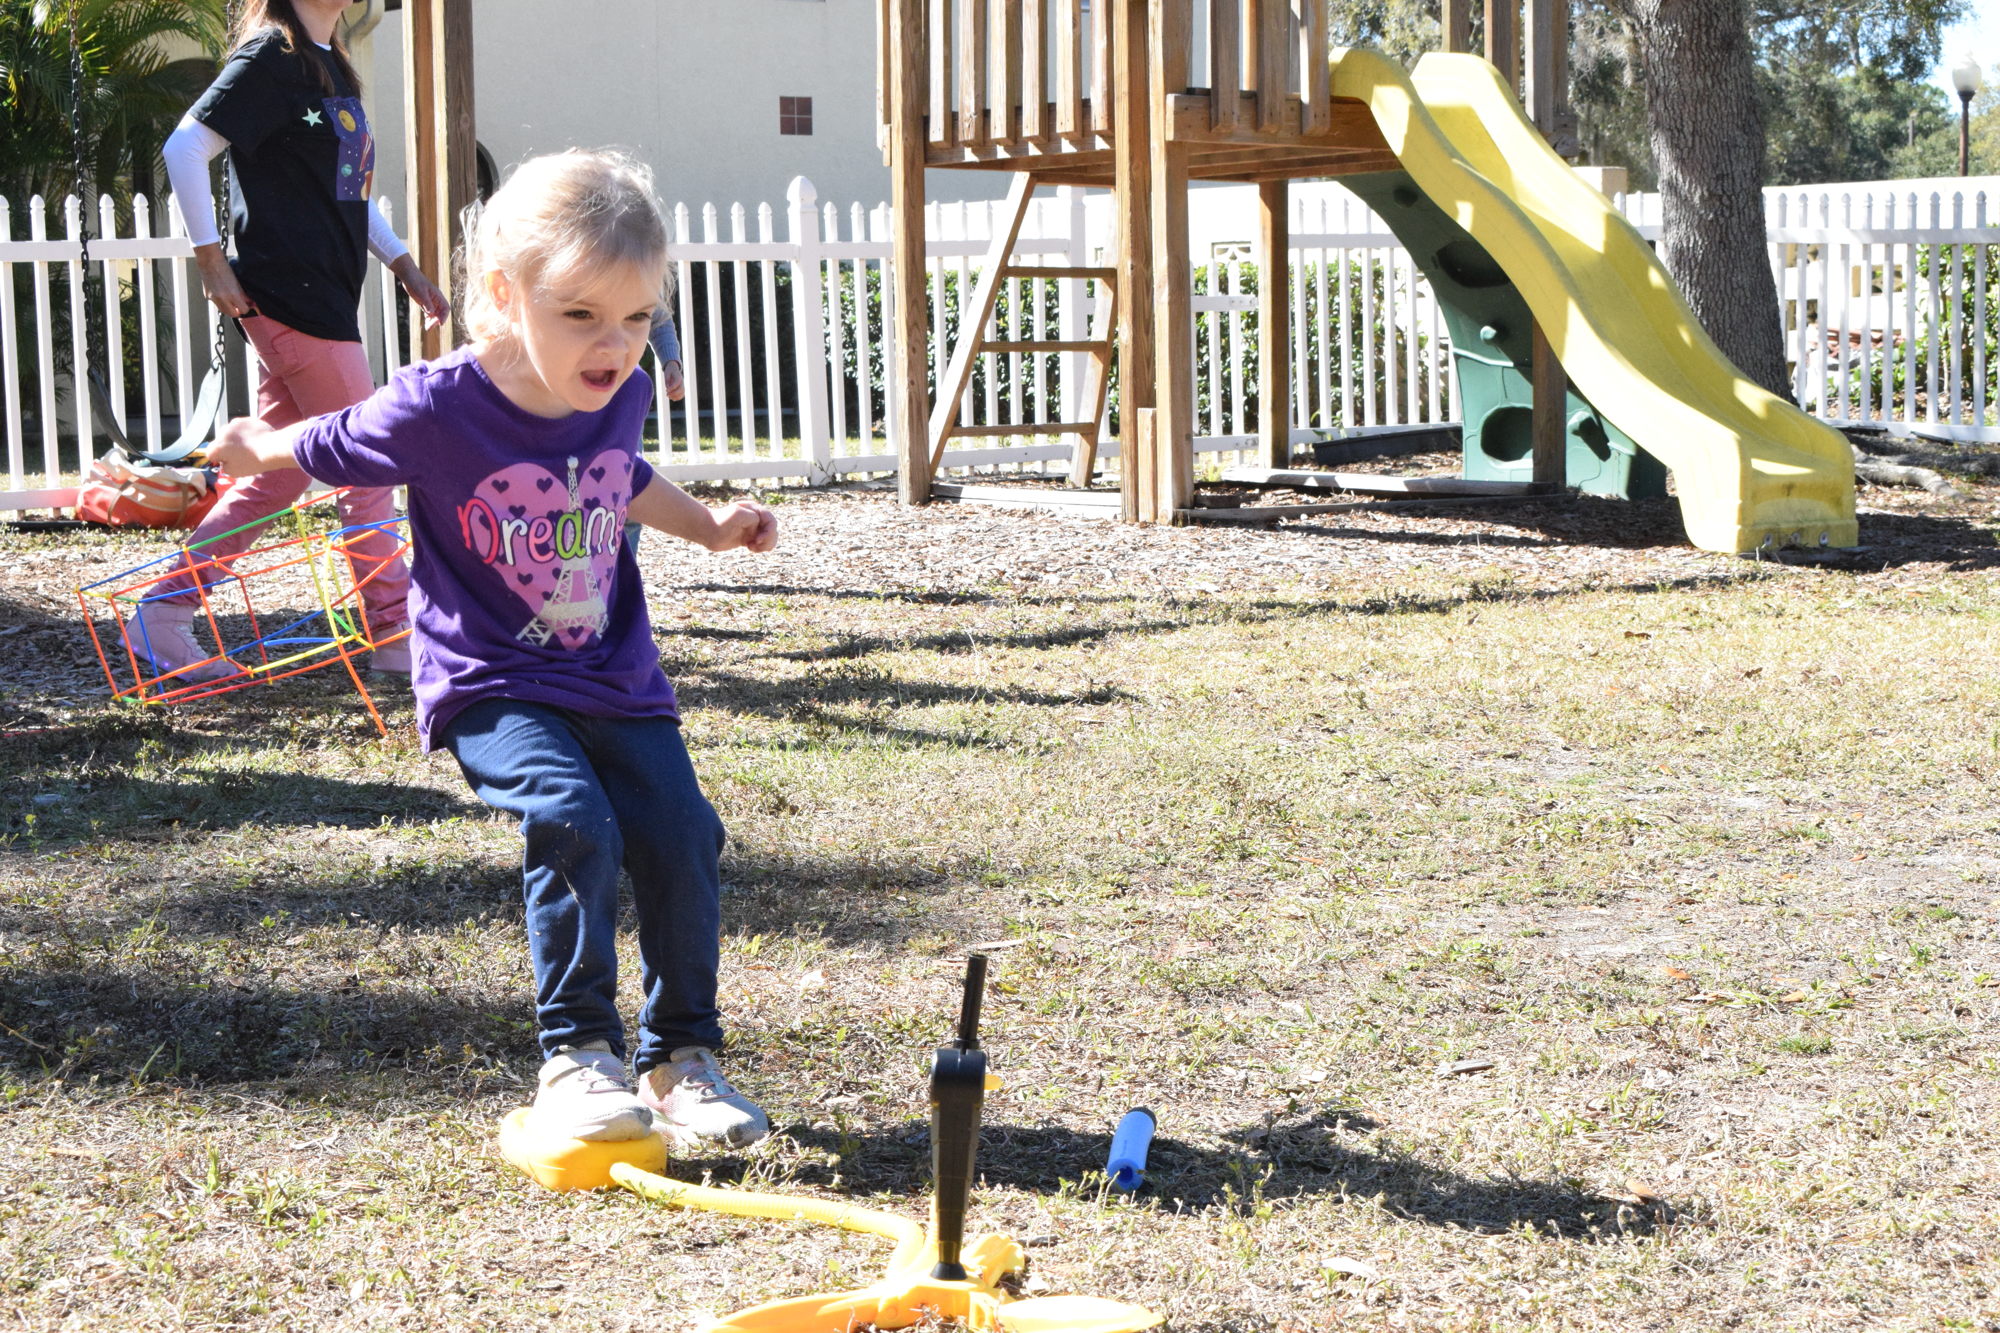 Lakewood Ranch's Kali Hill, who is 4, launches a toy rocket into the air.